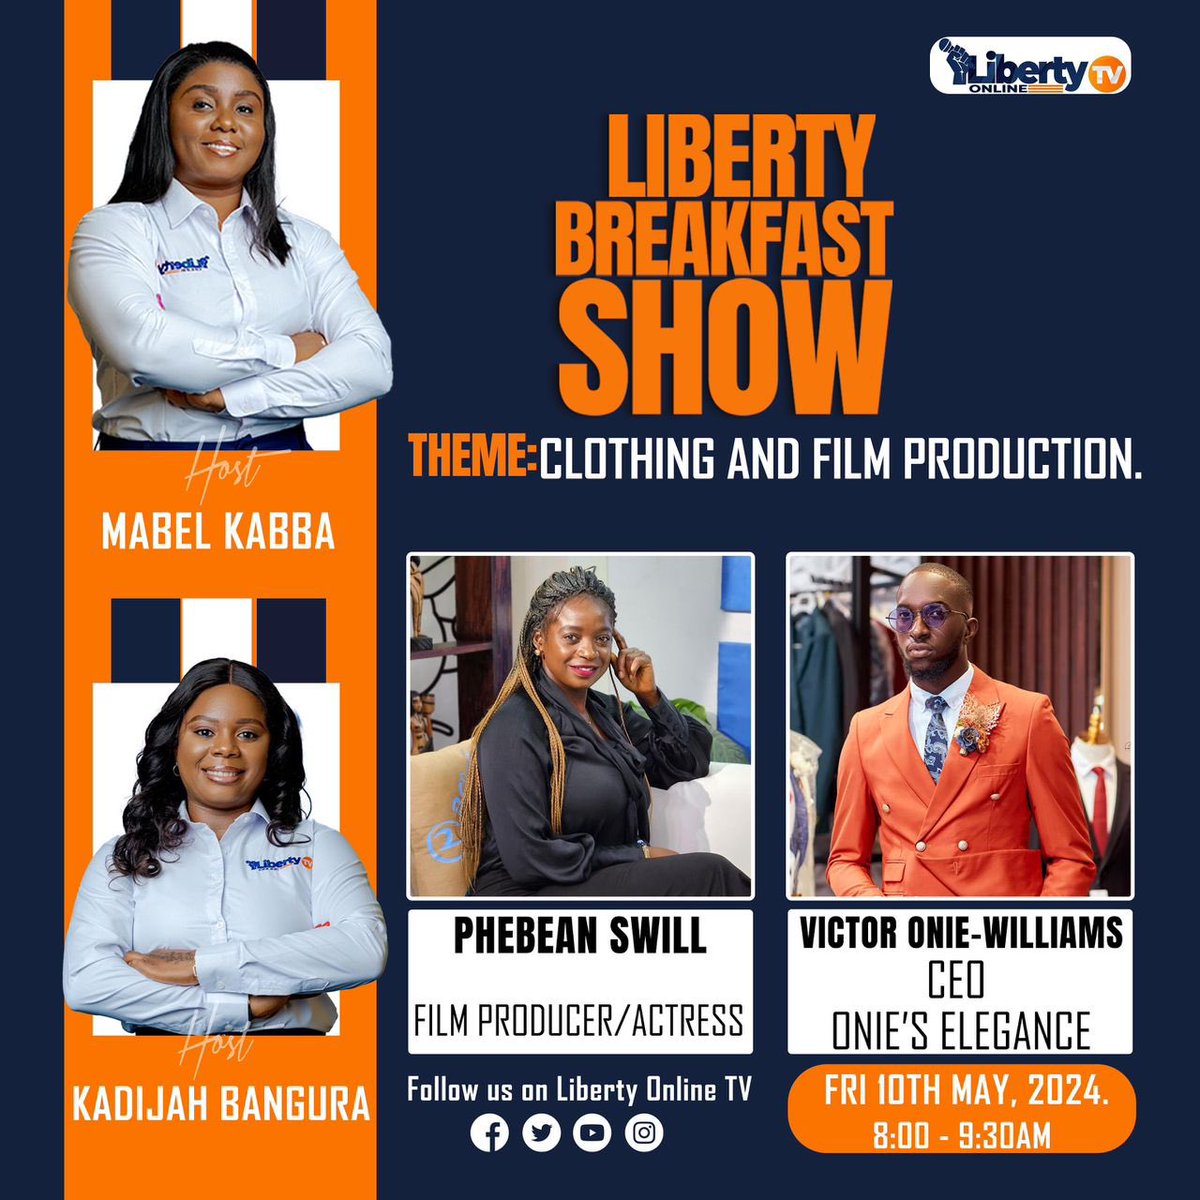 Don't miss tomorrow's episode of the Liberty Breakfast Show! We are thrilled to host two of Sierra Leone's leading figures in the fashion and film industry.

Be sure to join us from 8:00 a.m. to 9:30 a.m. as they delve into their inspiring journeys to success.

#SaloneX #SL